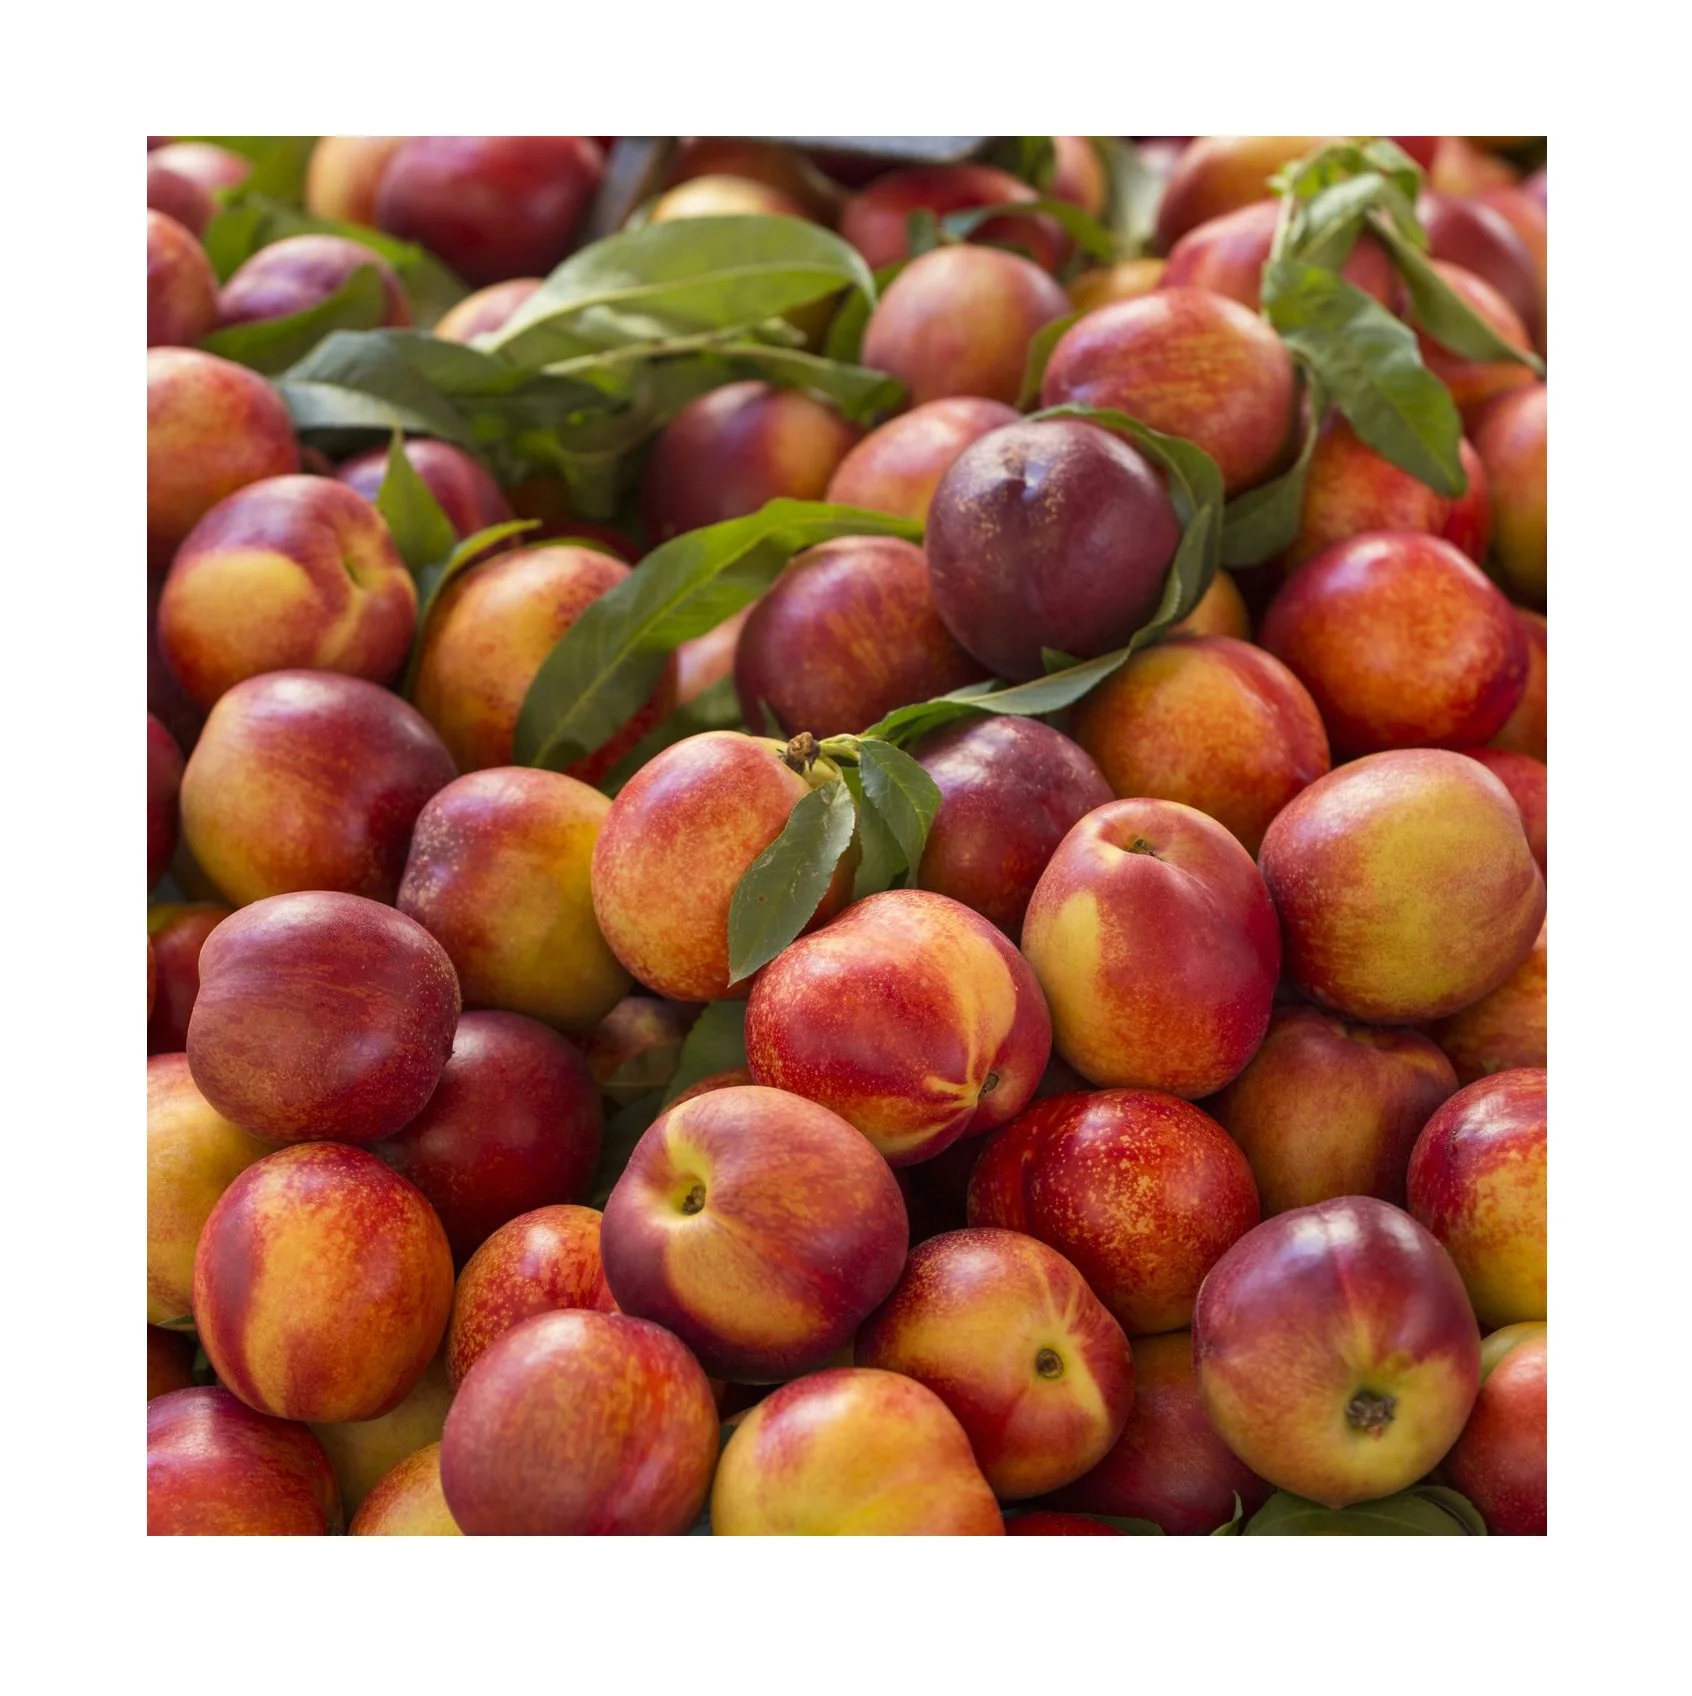 Cheap Price Bulk Stock Fresh Fruit Nectarines For Sale In Bulk With Fast Delivery